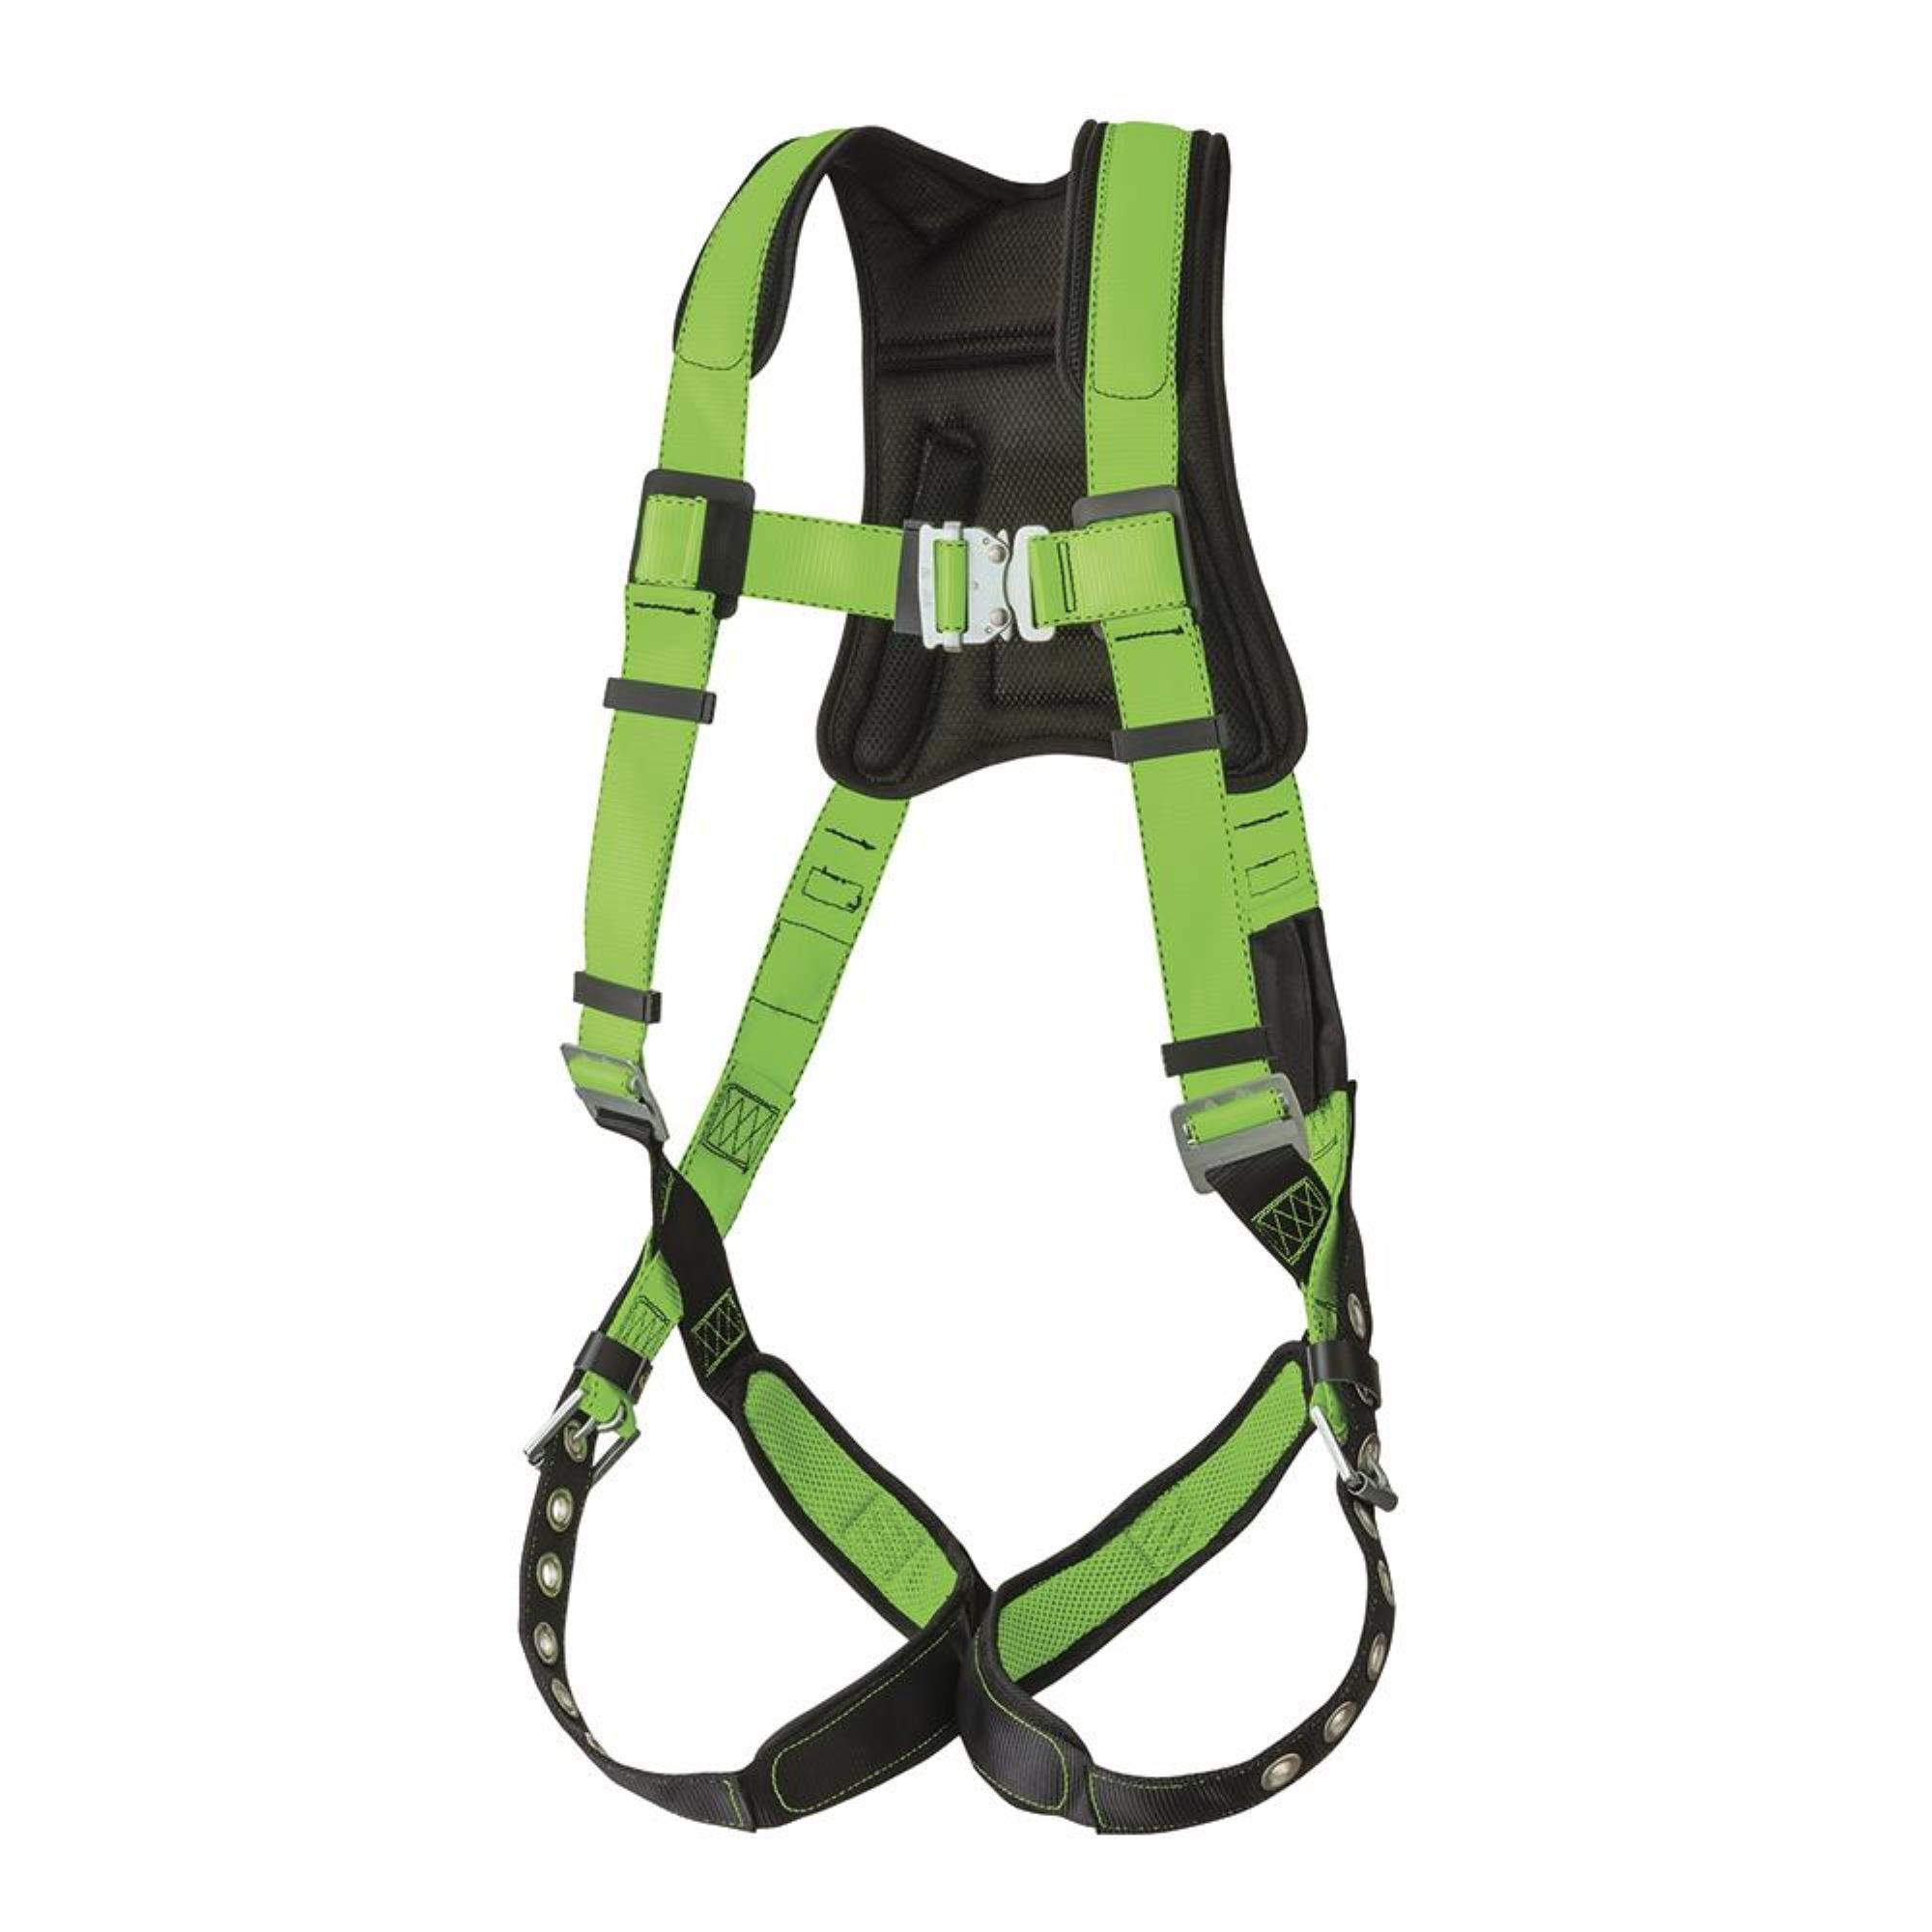 Peak Works, PeakPro Harness 1D Class A Grommeted Leg Strap, Weight Capacity 400 lb, Harness Size One Size, Model V8006200